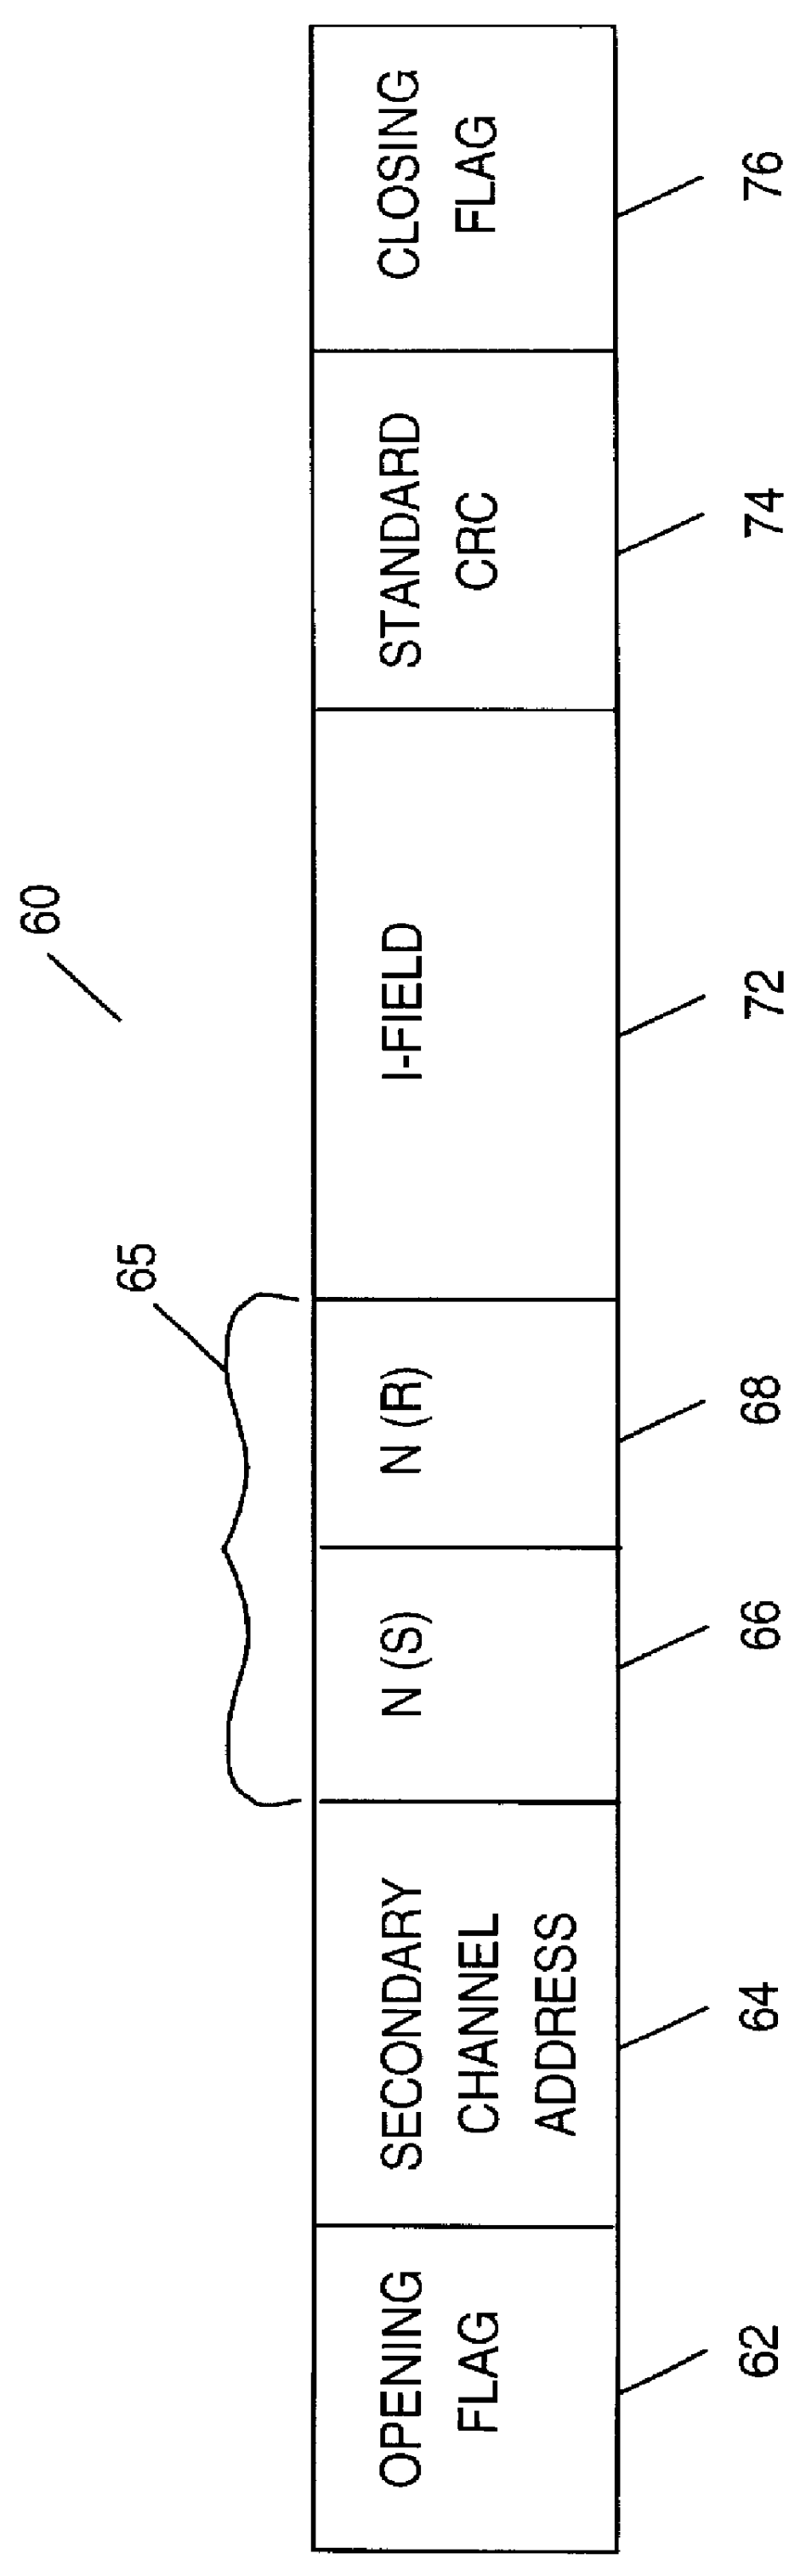 Method and system in a data communications system for the establishment of multiple, related data links and the utilization of one data link for recovery of errors detected on another link